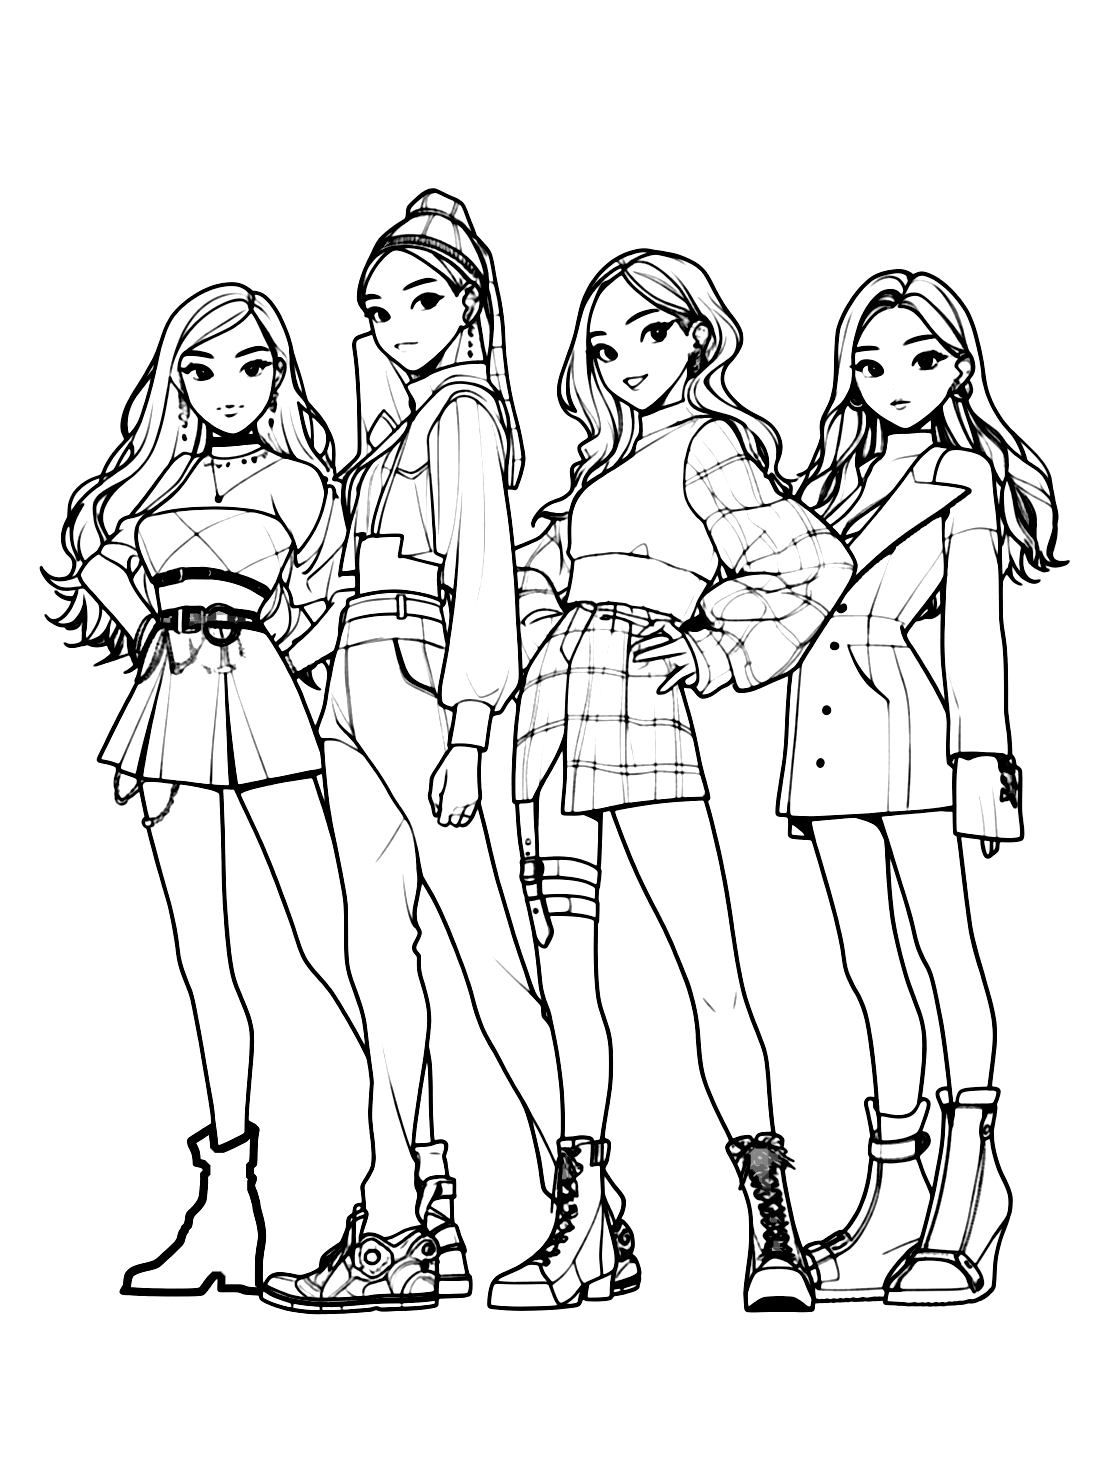 Blackpink group coloring pages